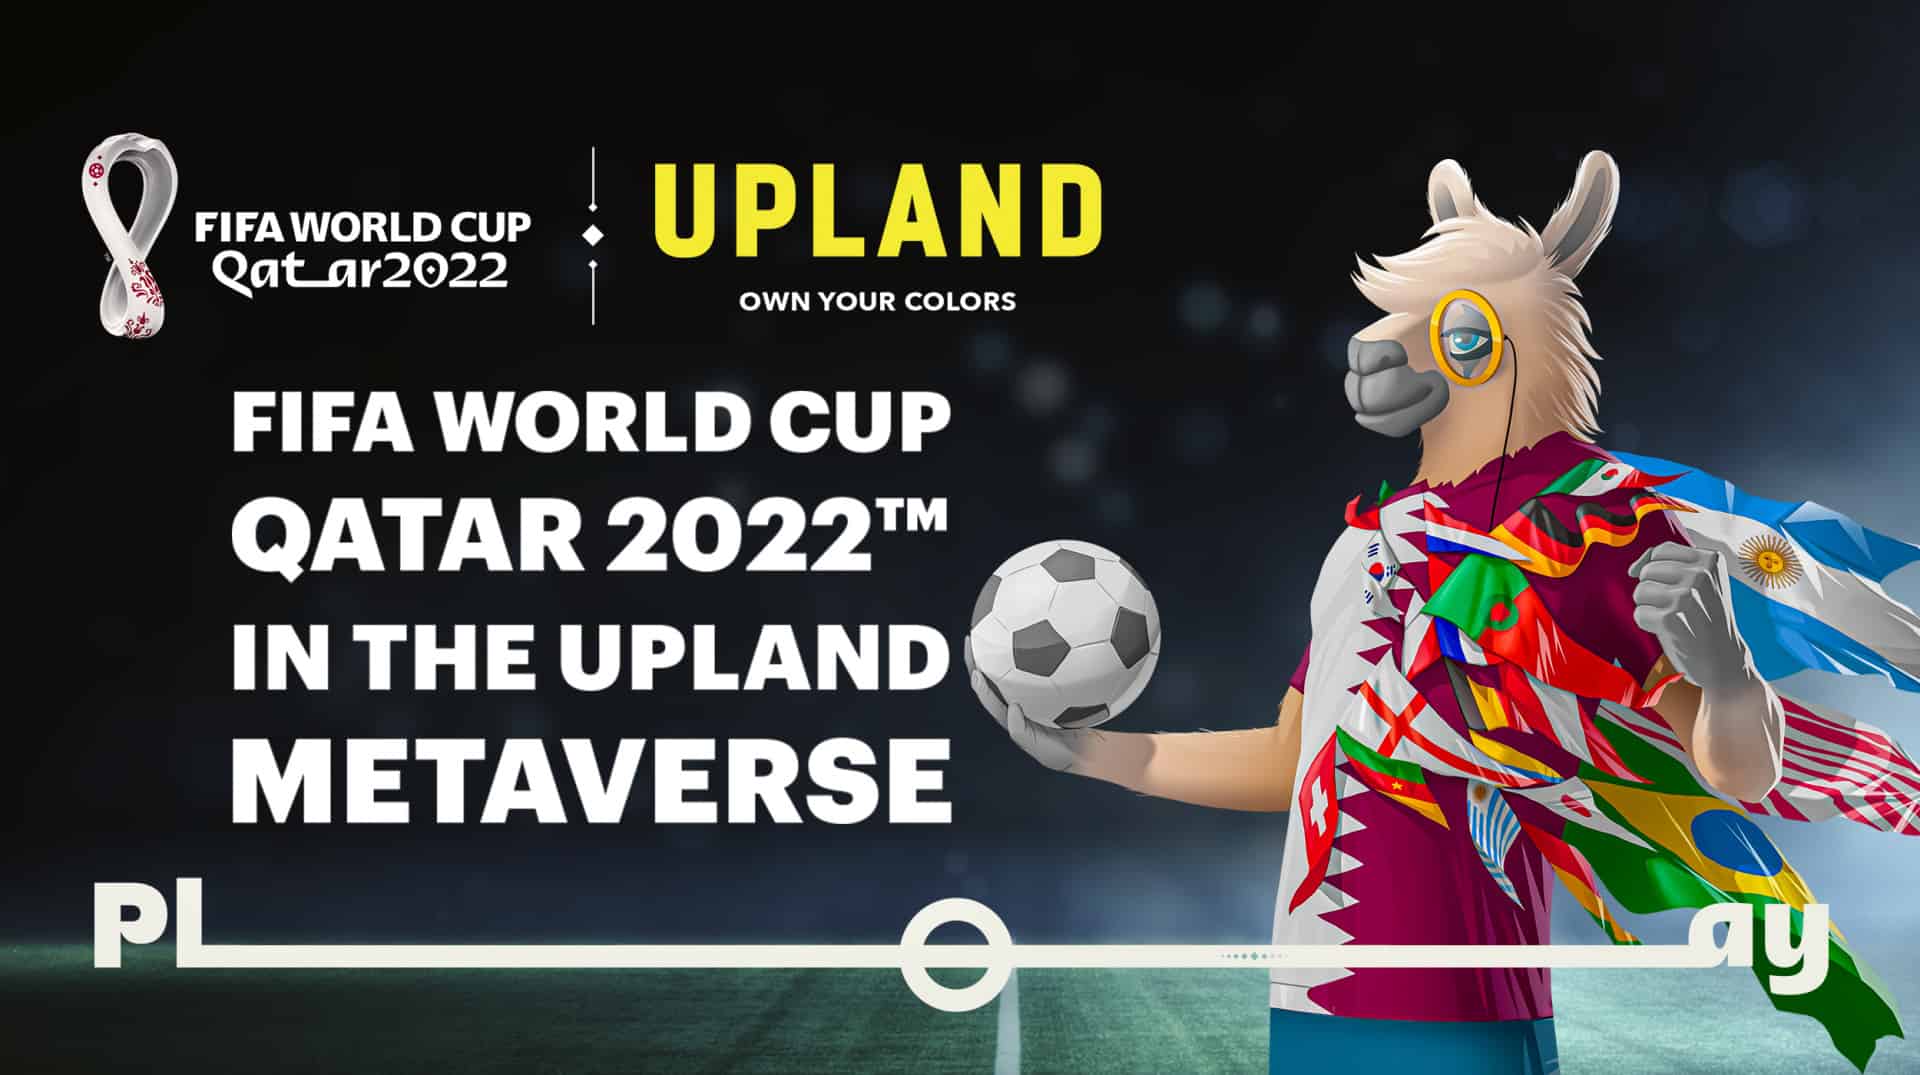 Upland-and-fifa-officially-launch-the-fifa-world-cup-qatar-2022-metaverse-experience